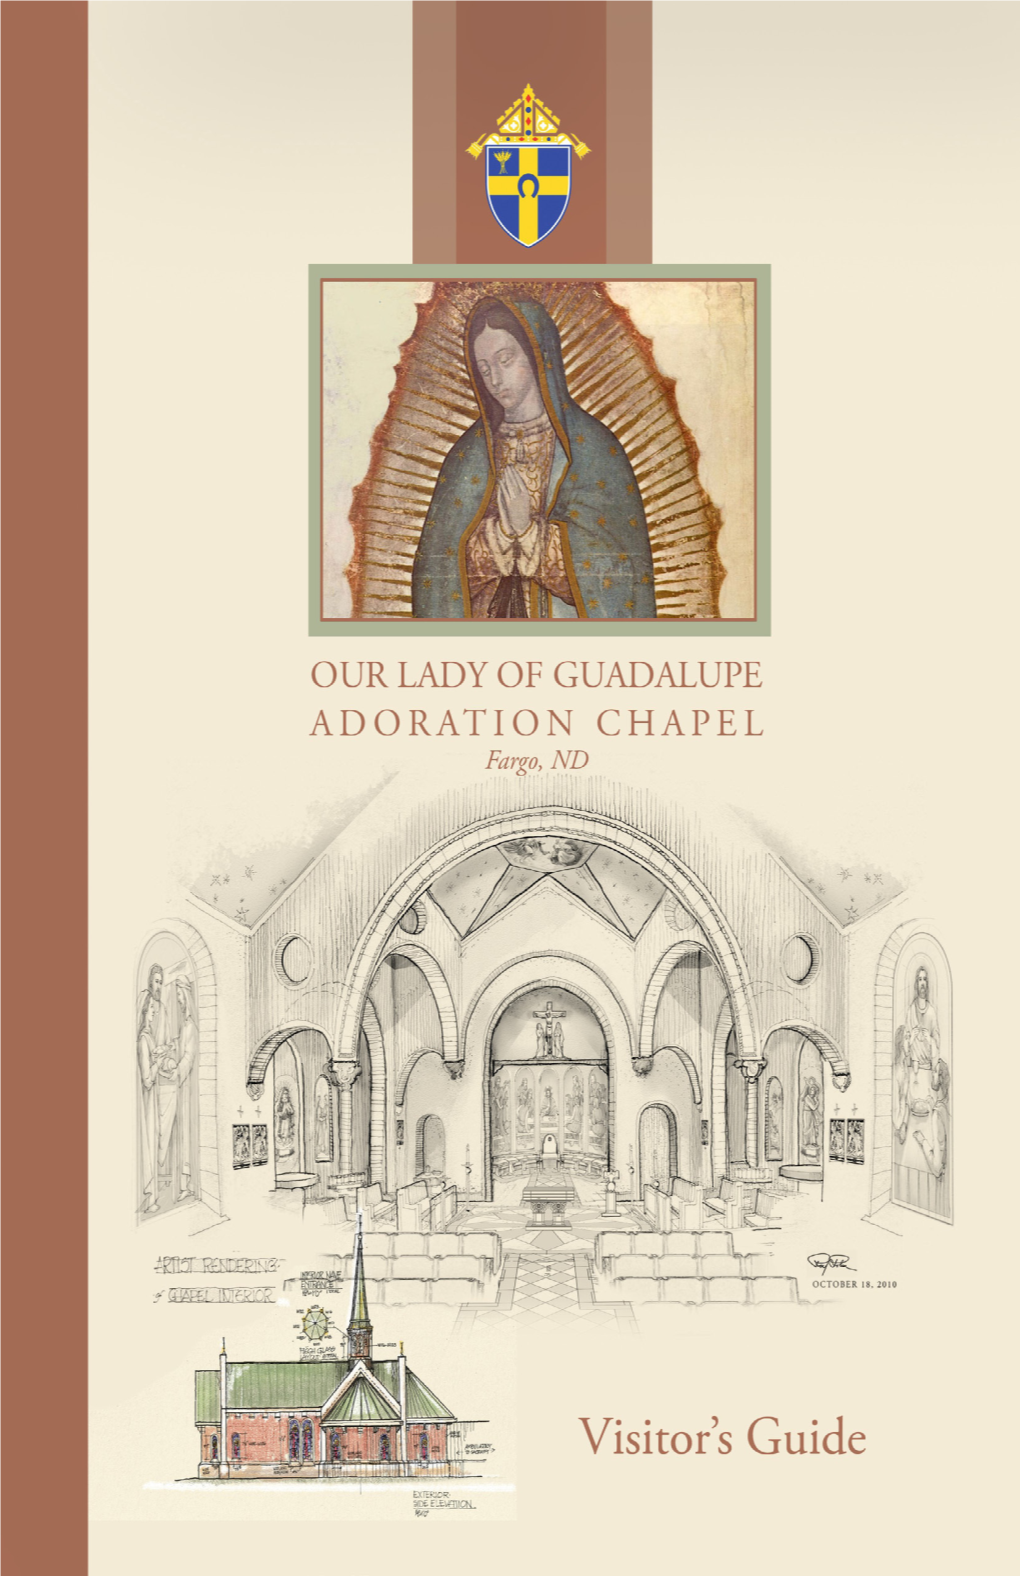 Our Lady of Guadalupe Adoration Chapel Visitor's